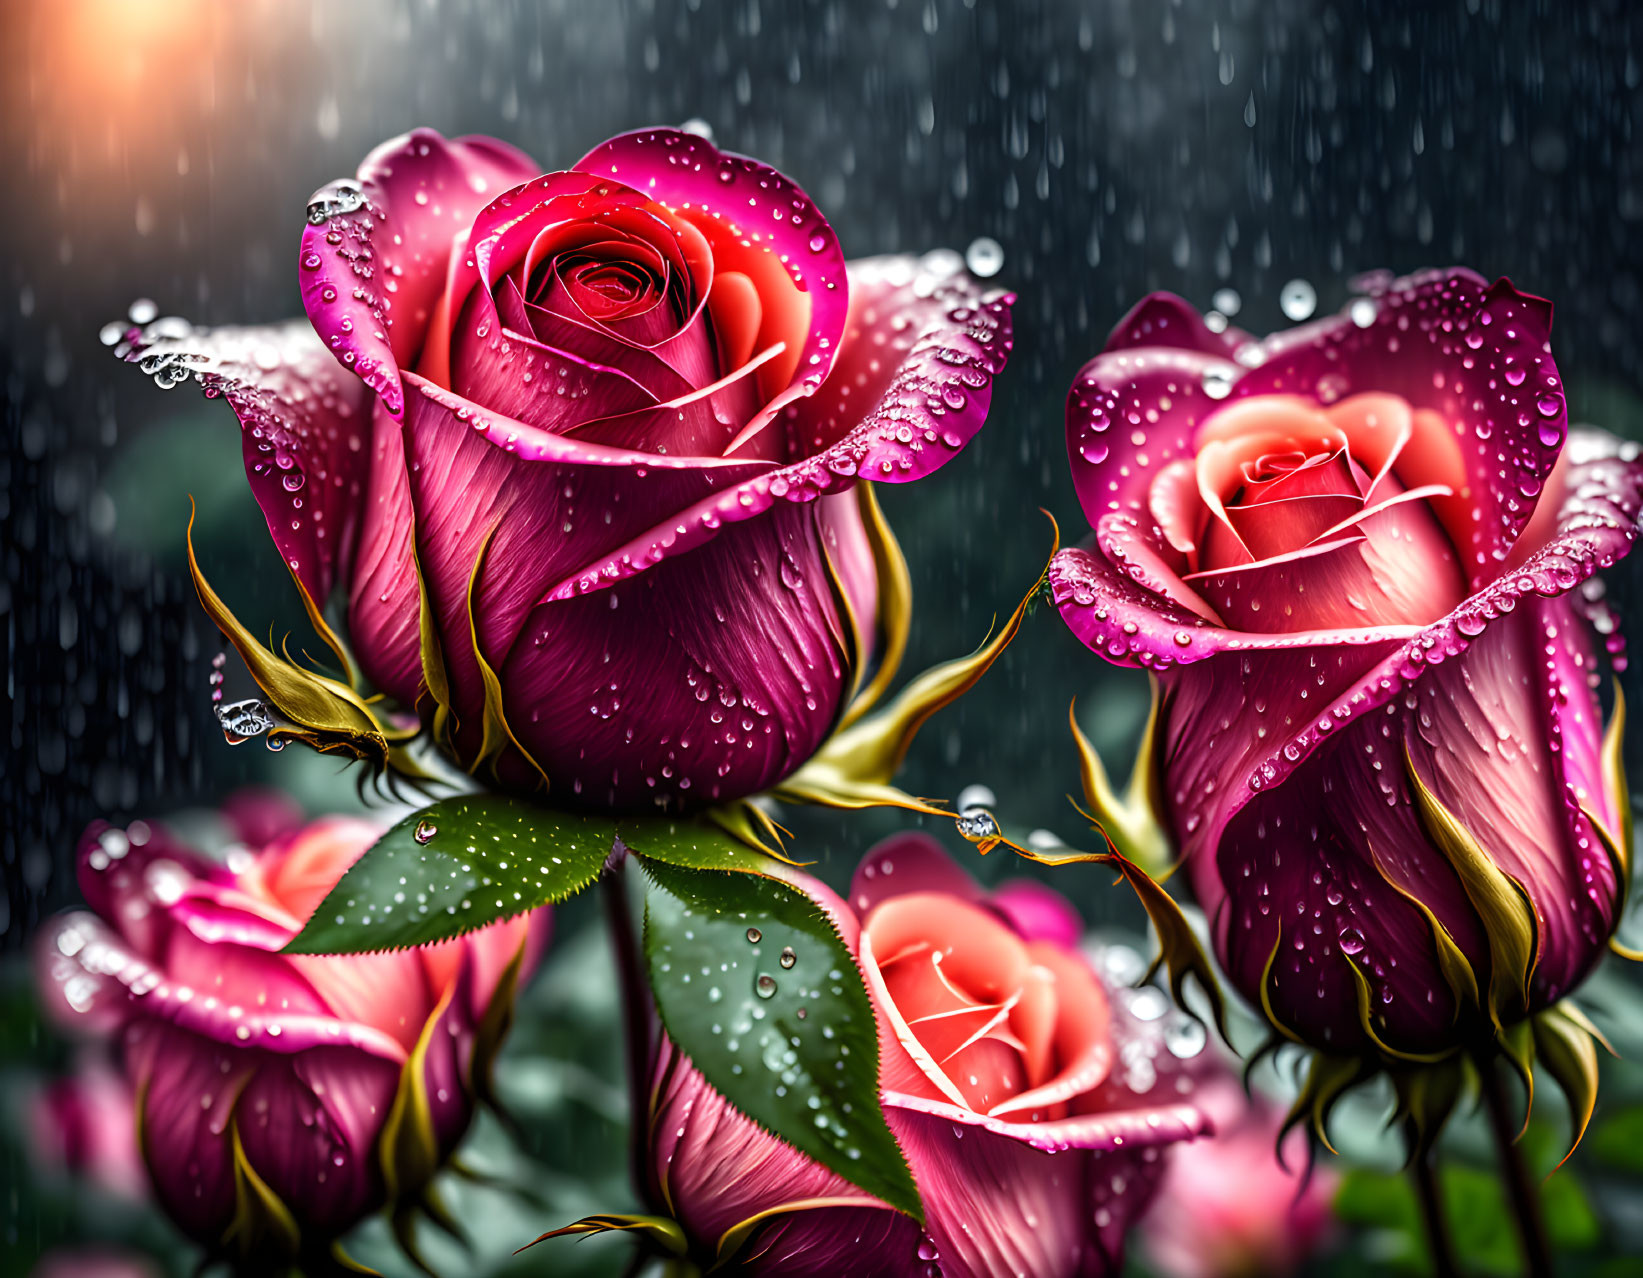 Beautiful Roses with Water Droplets on Petals and Leaves in Rainy Setting